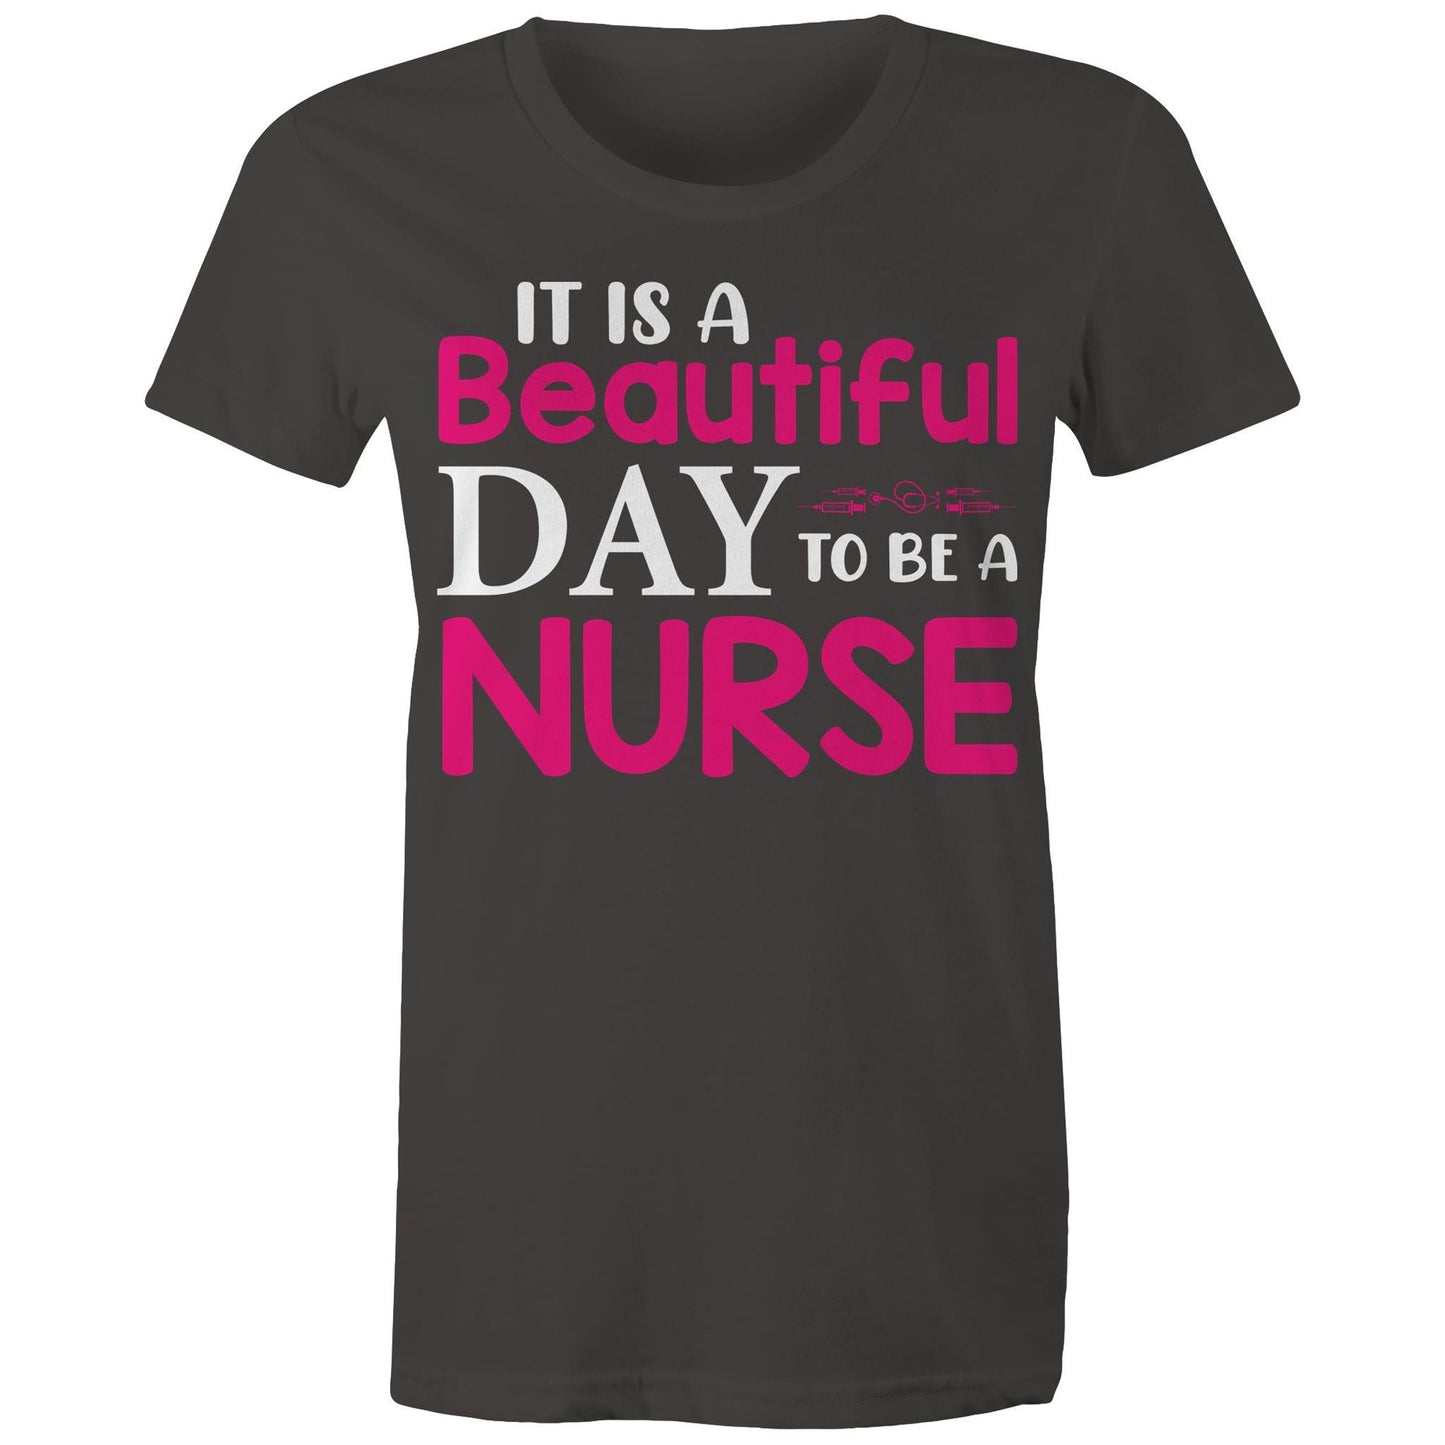 Beautiful Day to be a Nurse Women's Maple Tee